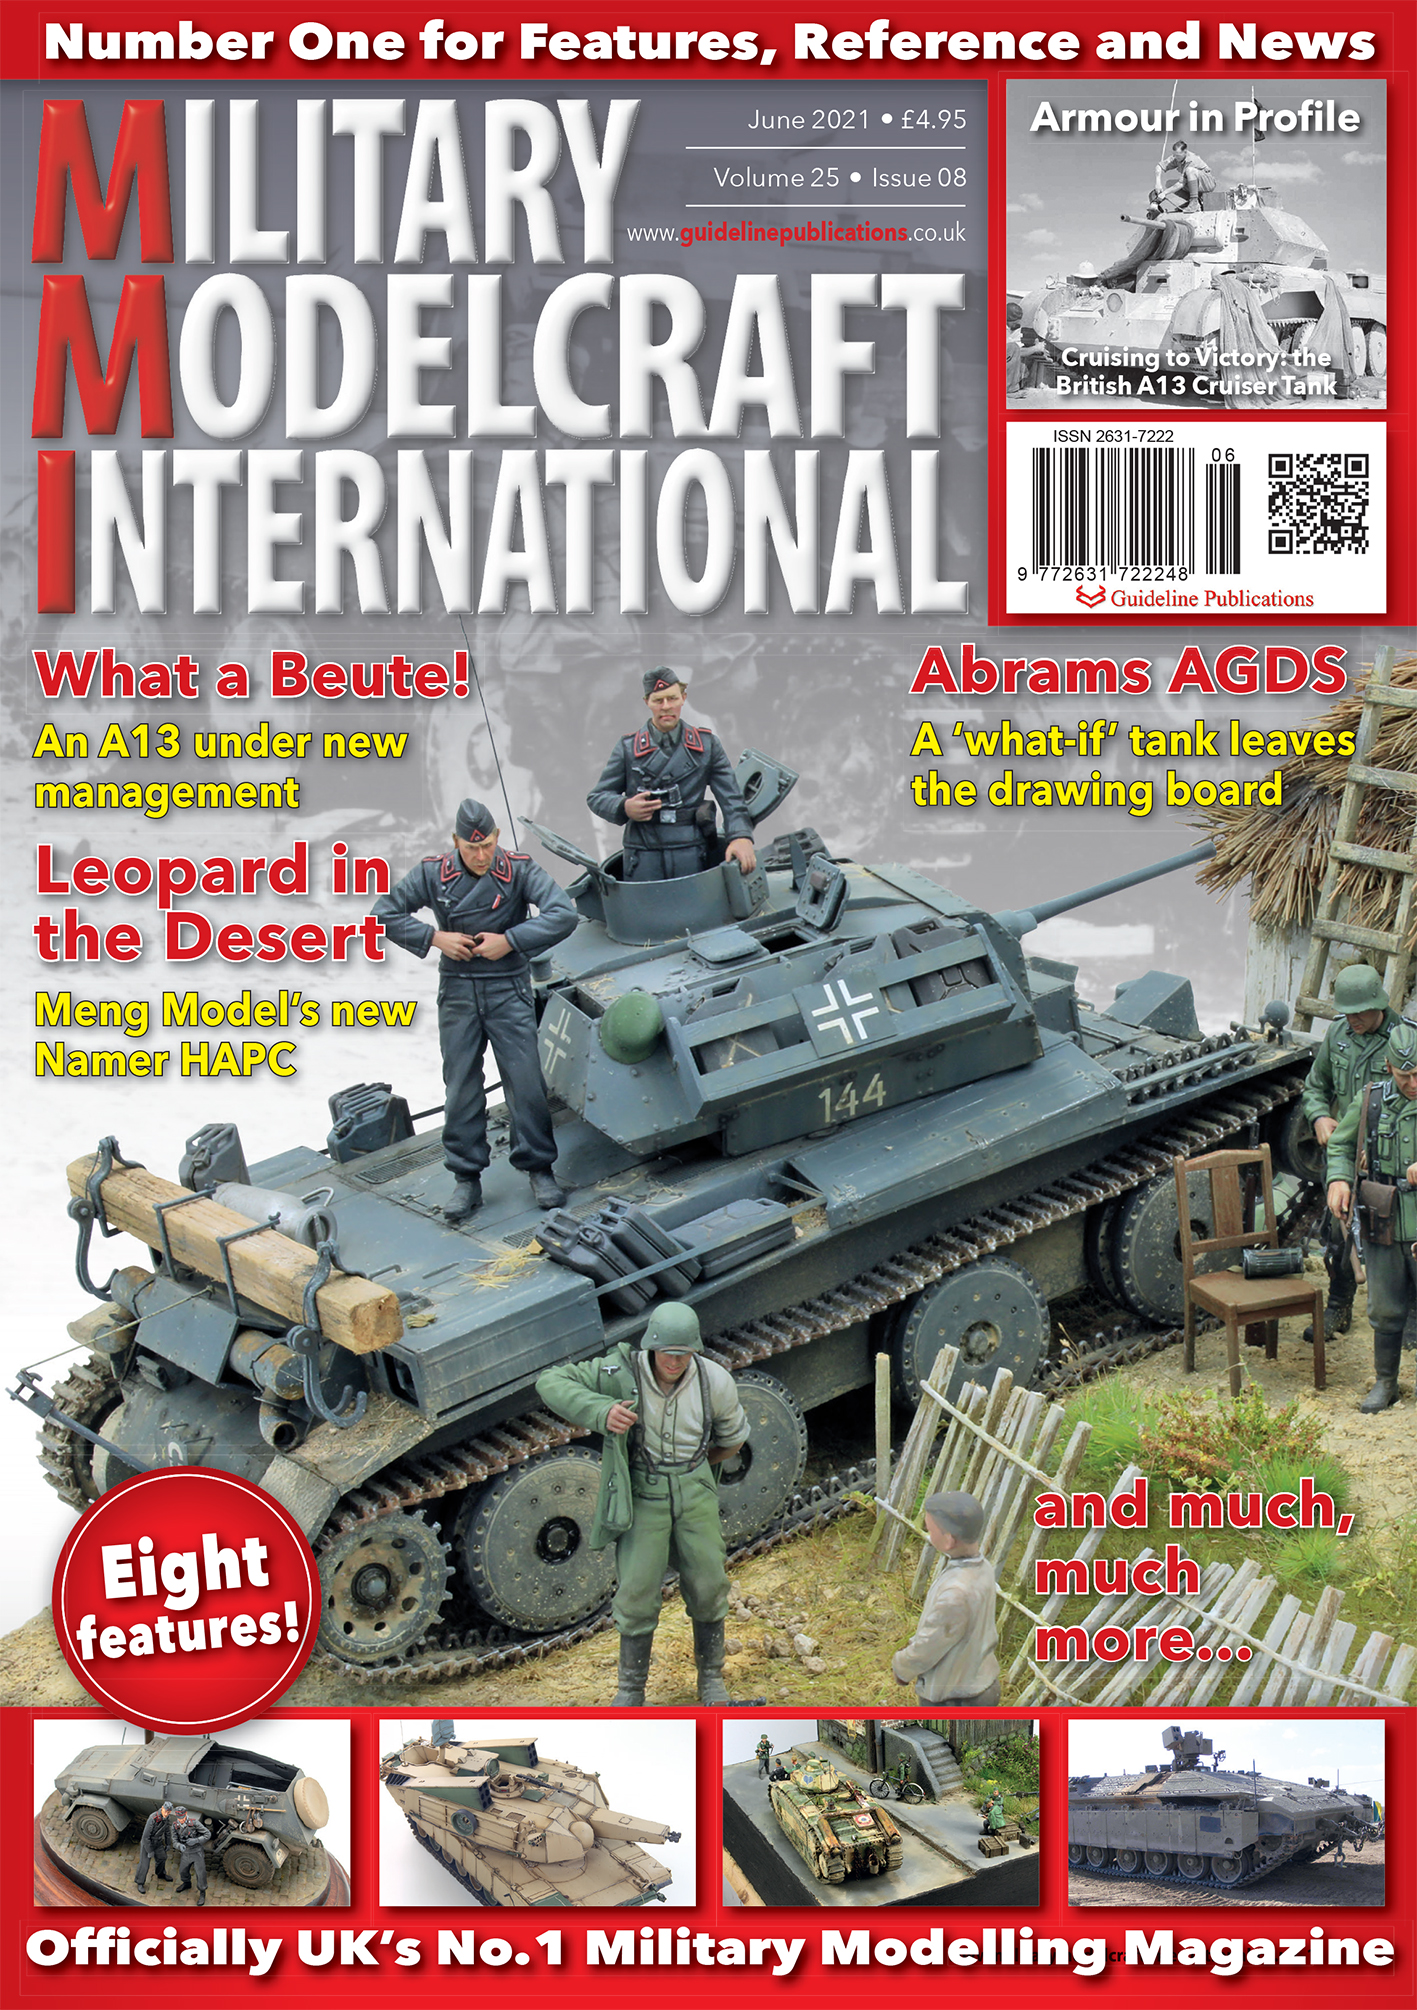 Guideline Publications Military Modelcraft Int June 21 vol 25-08 June 21 